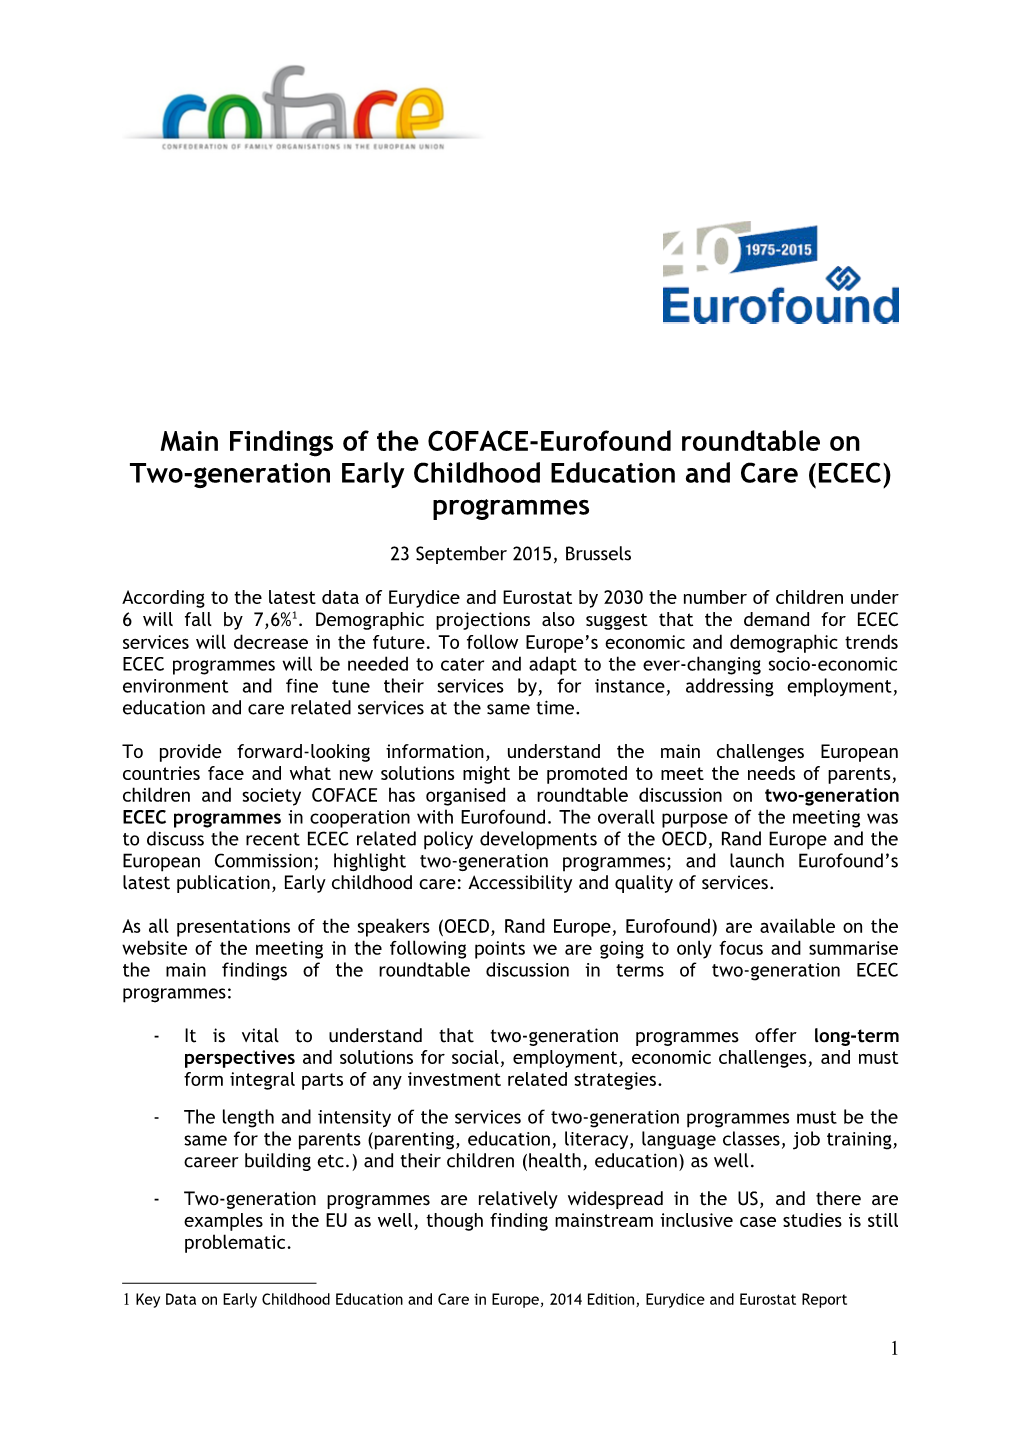 Main Findings of the COFACE-Eurofound Roundtable On